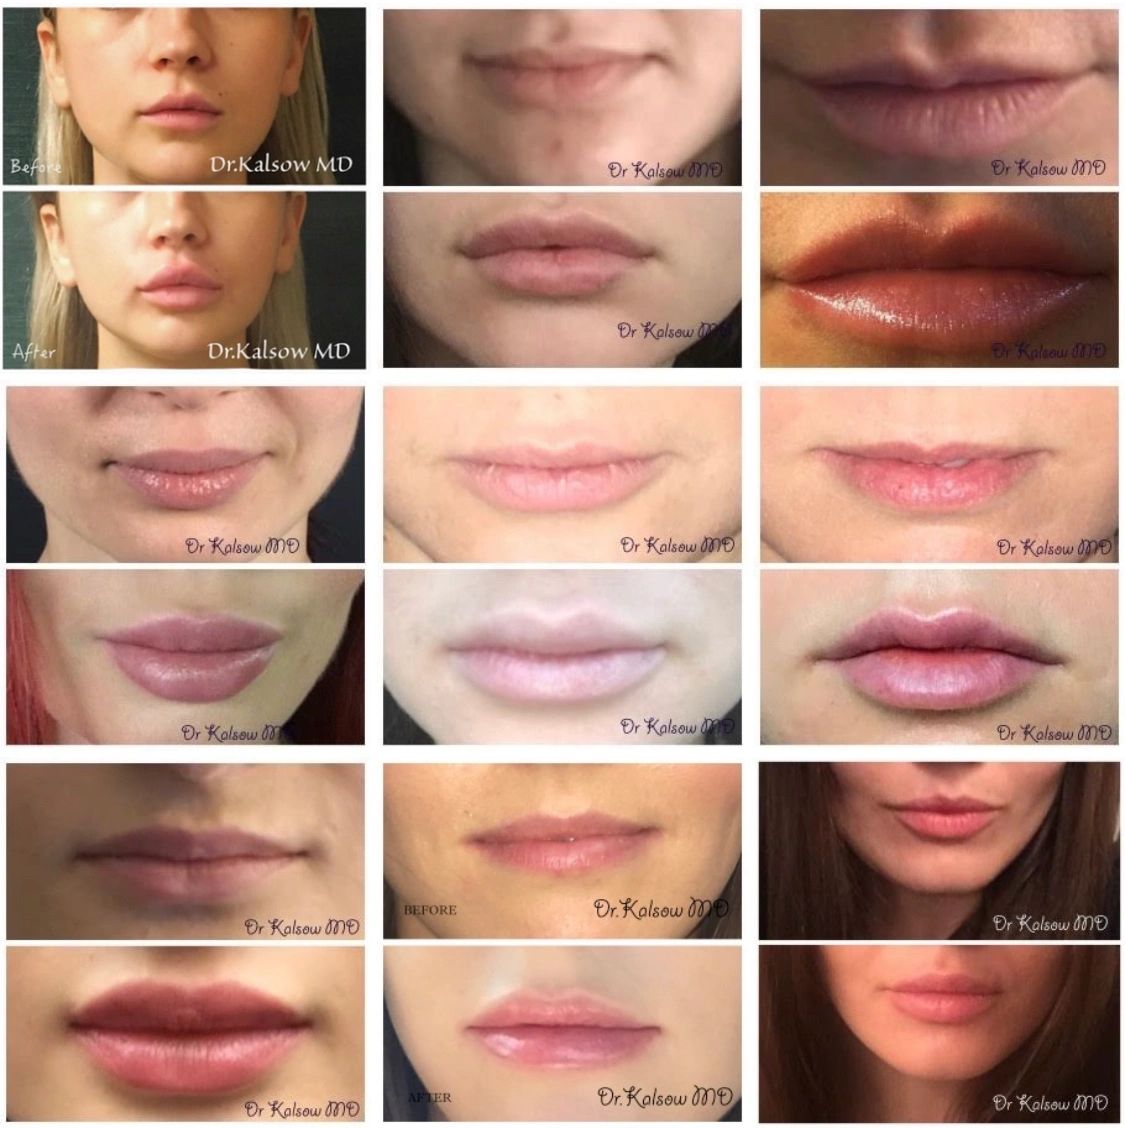 Before and after photos of lip augmentation.  